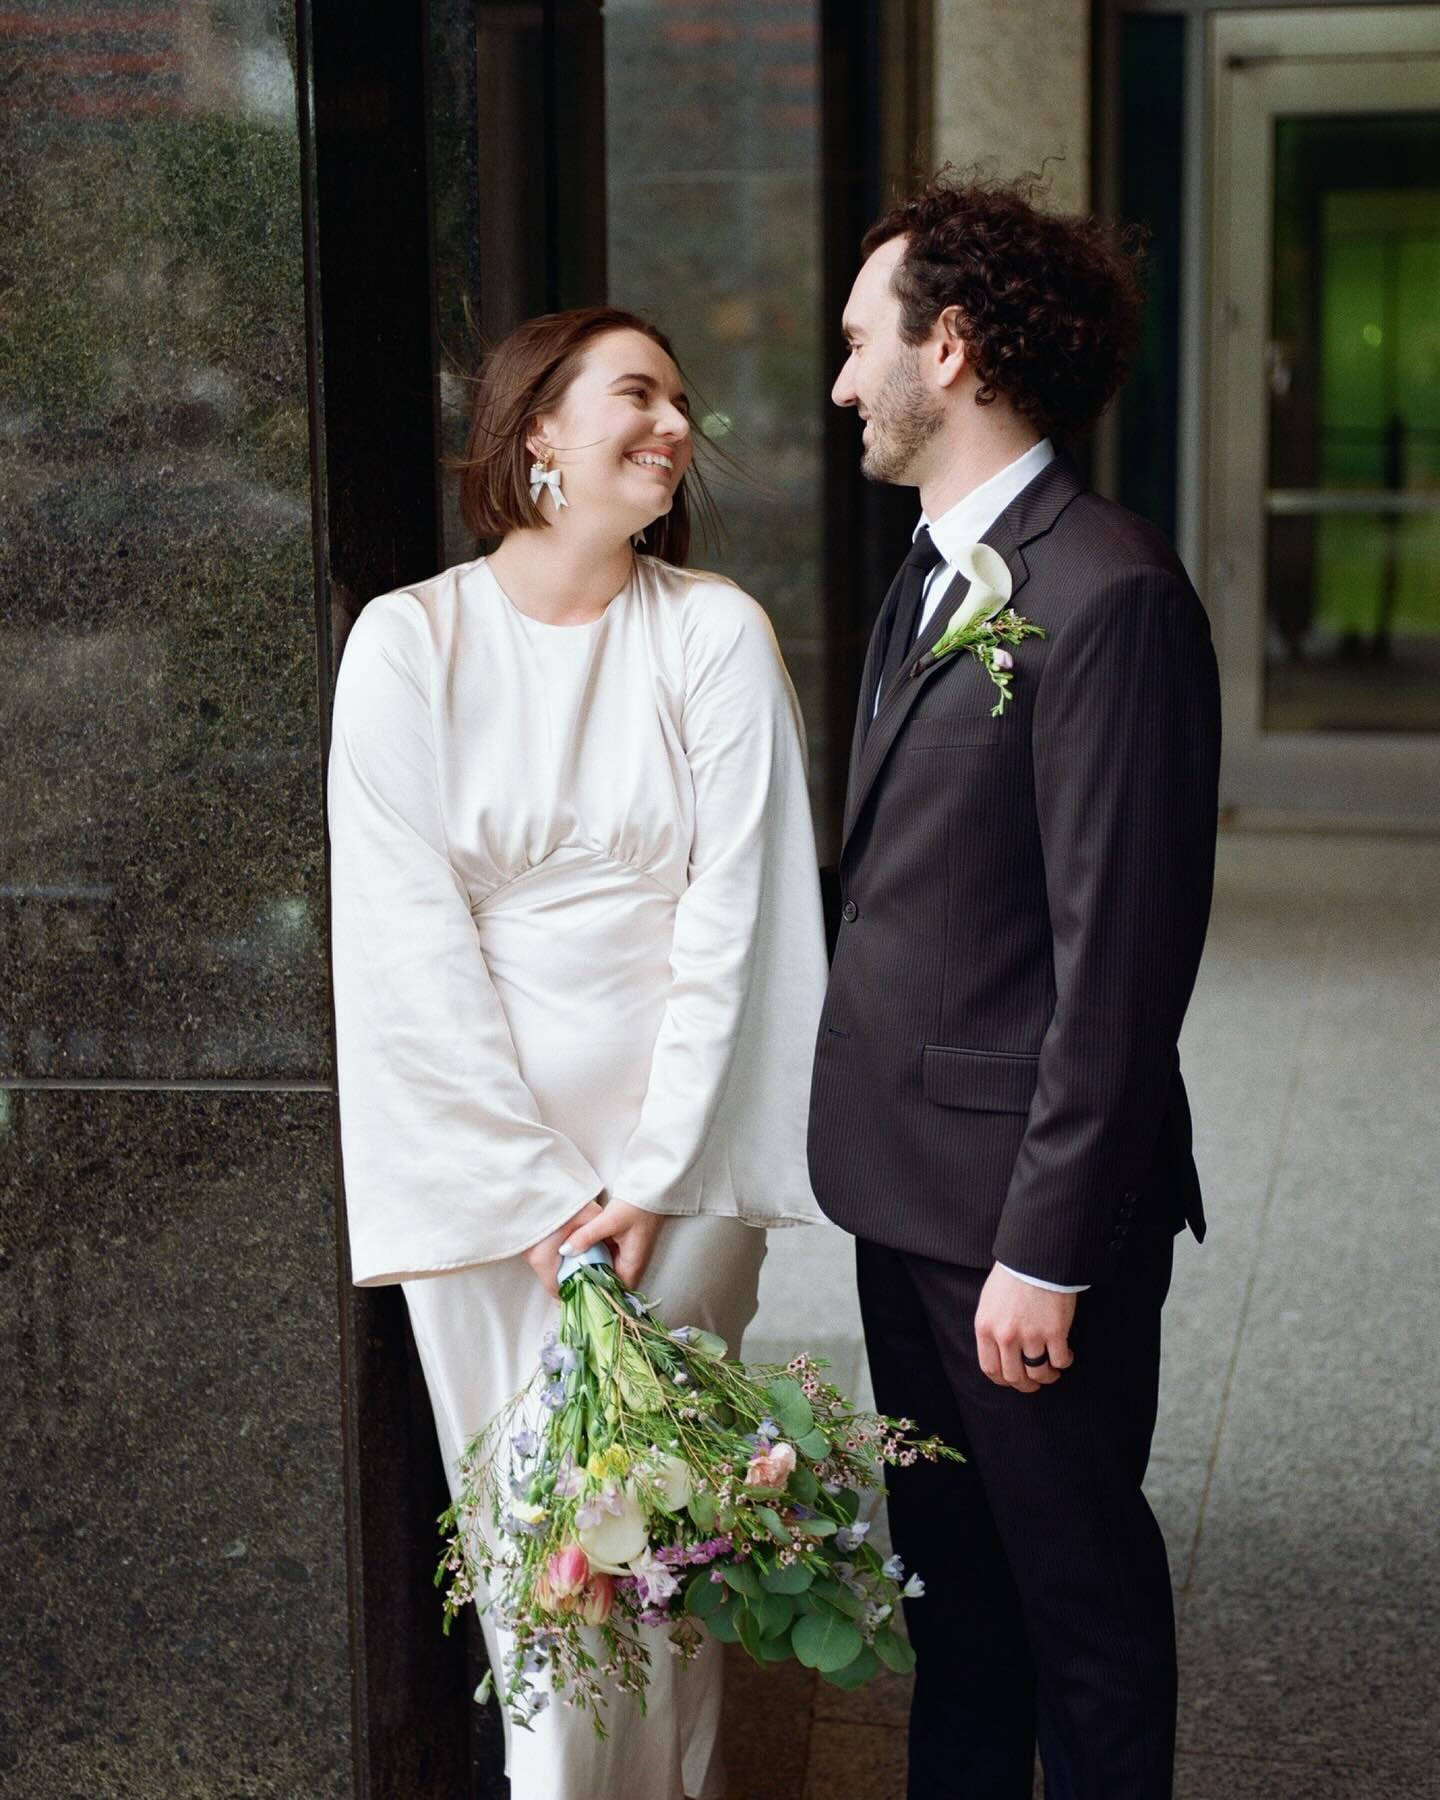 Film scans of Cassie &amp; Sam&rsquo;s sweet spring elopement at the Wake County Justice Center, one of my absolute fave places for couples to get married. 

Congrats newlyweds! 

#raleighweddingphotographer #filmphotographer #ncfilmphotographer #ncw